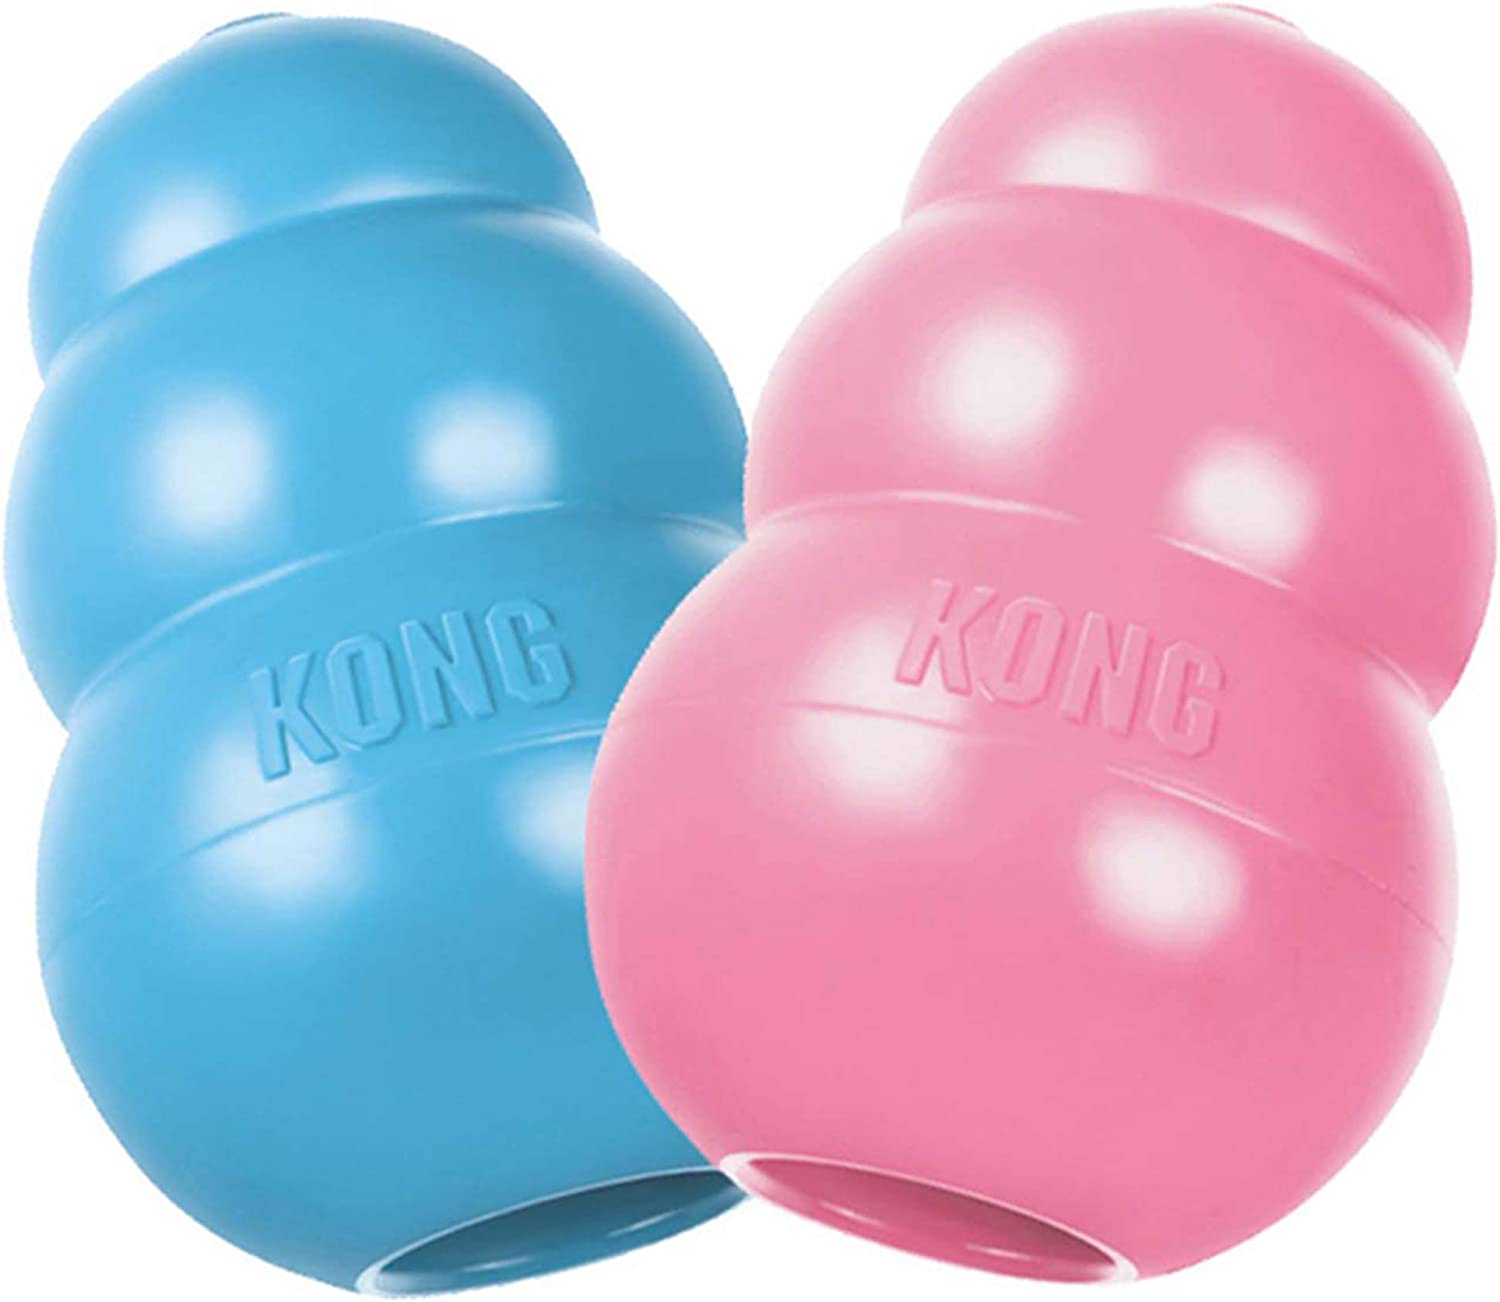 puppy kong toys are safe chews for puppies